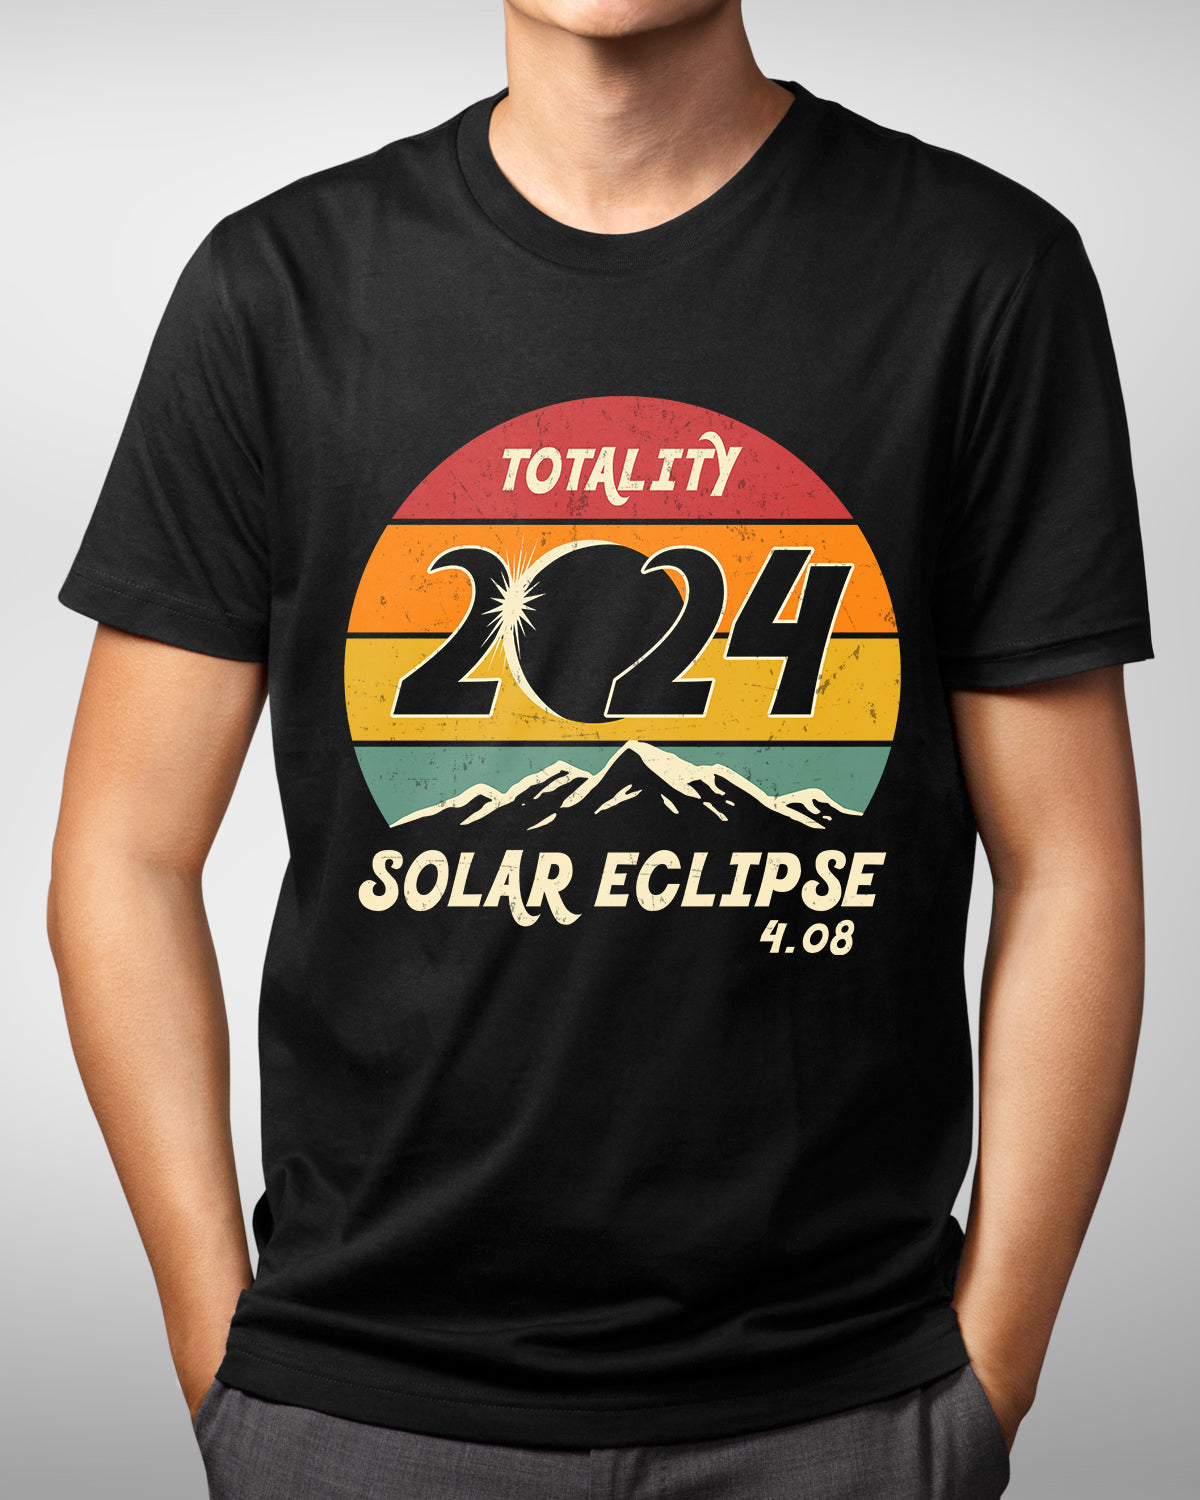 Total Solar Eclipse Shirt - Sun and Moon Totality - April 8, 2024